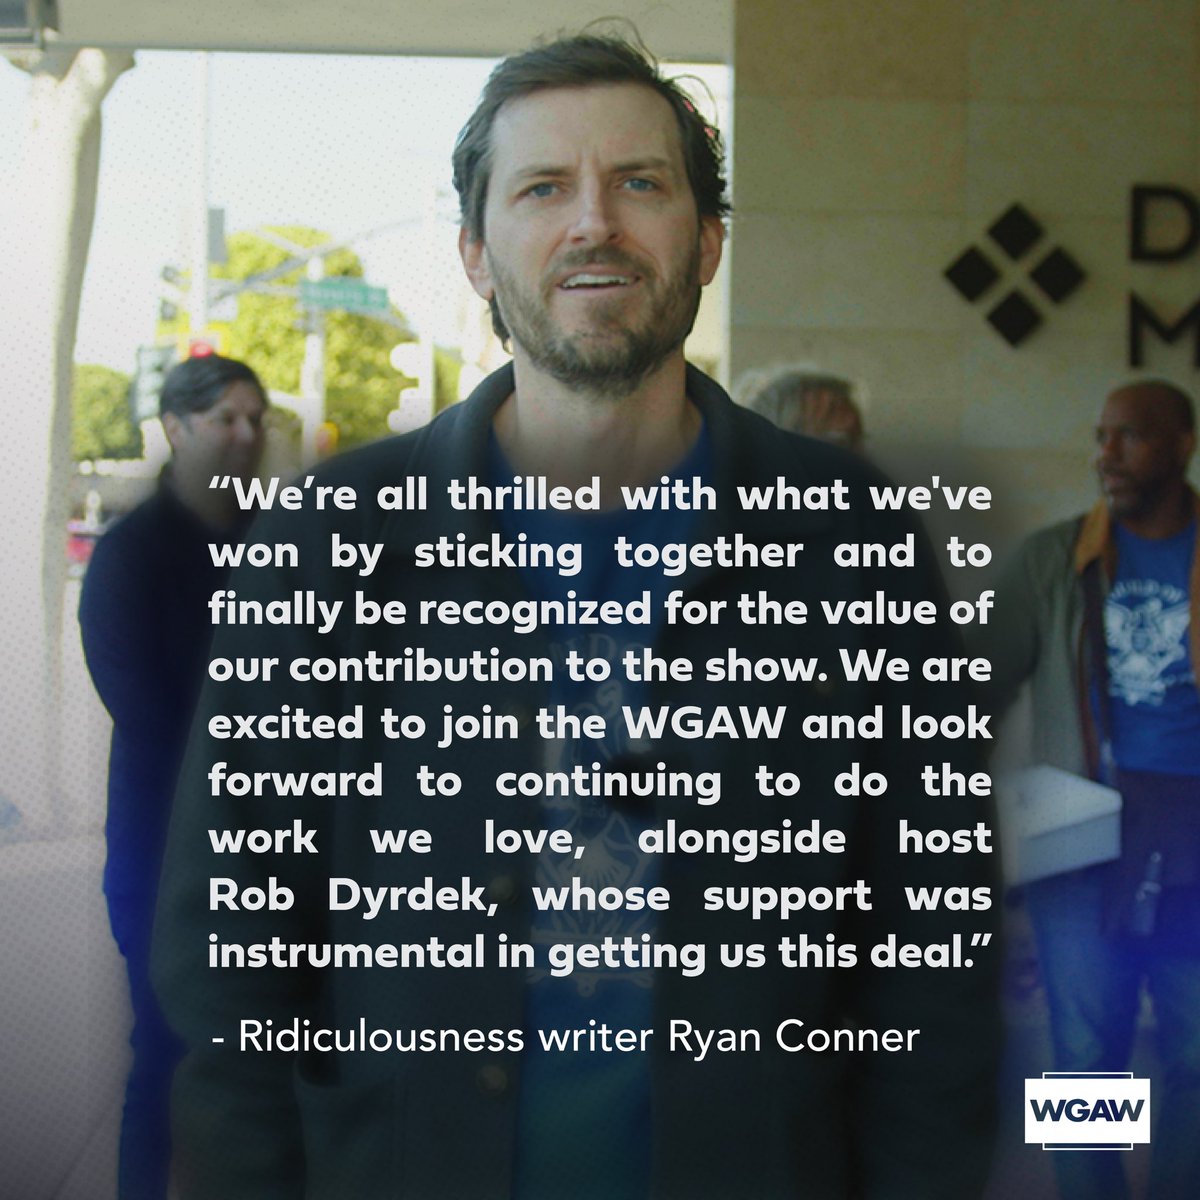 @ridiculousness writer Ryan Conner on achieving their first contract 👏 #WGAStrong